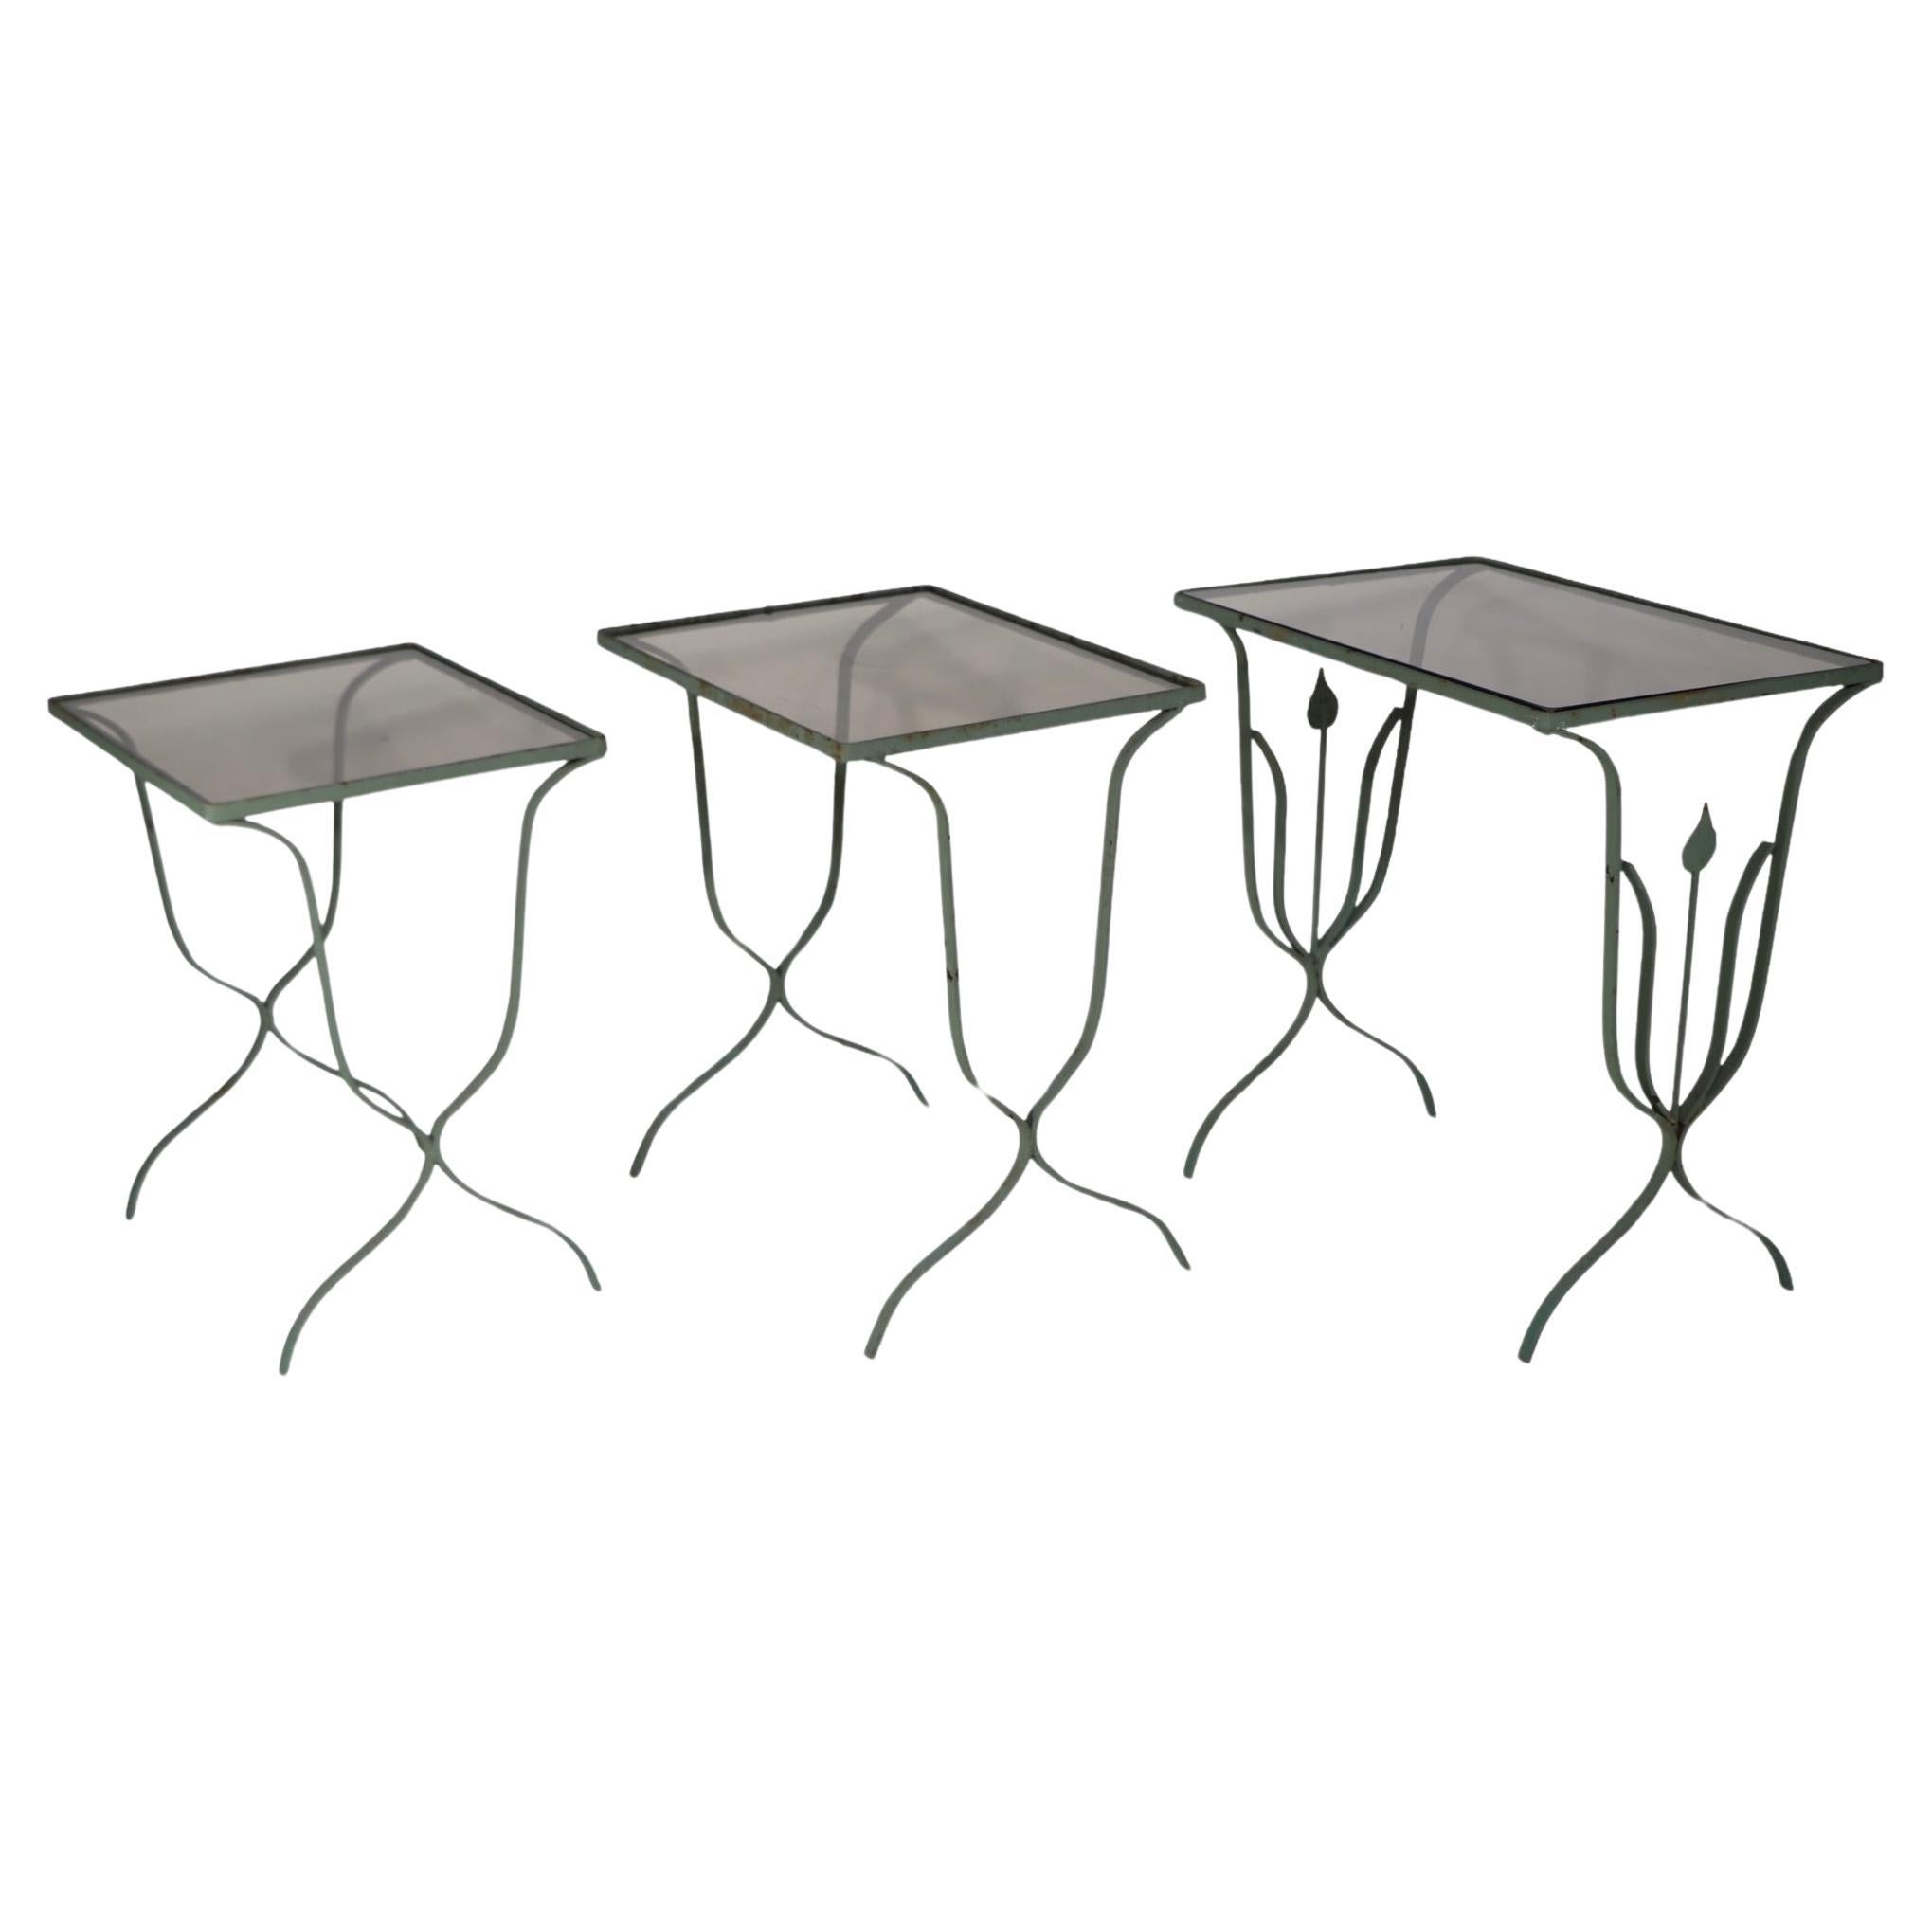 Unusual set of three graduated nesting  wrought iron and glass nesting tables. These chic tables feature an Art Deco  stylized modernist  profile of a plant on the largest table, and tinted, or smoked gray glass tops. The finish is original dusky